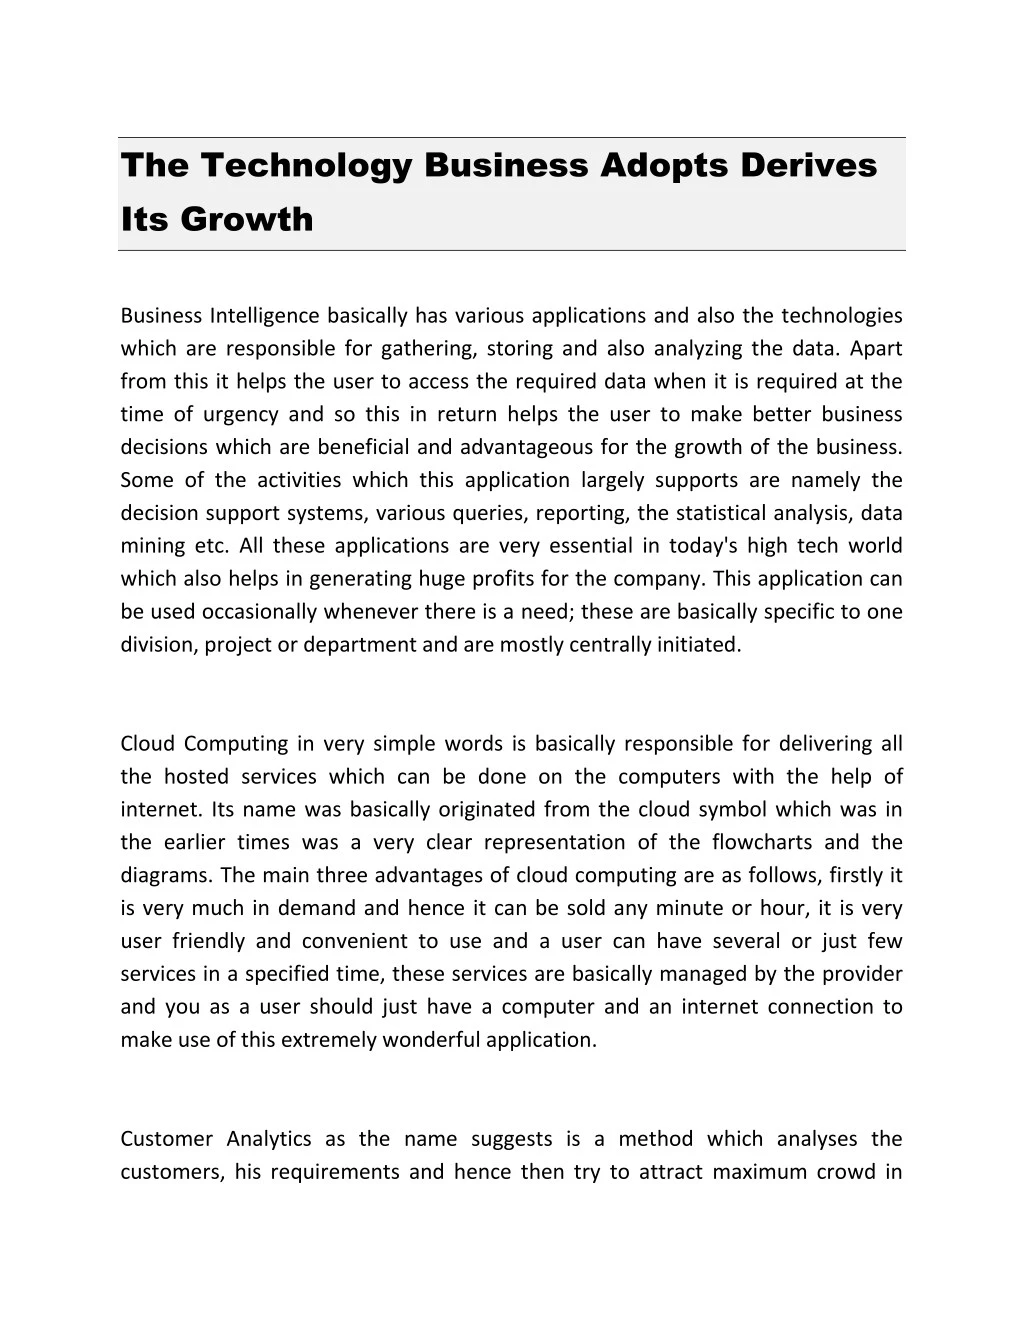 the technology business adopts derives its growth